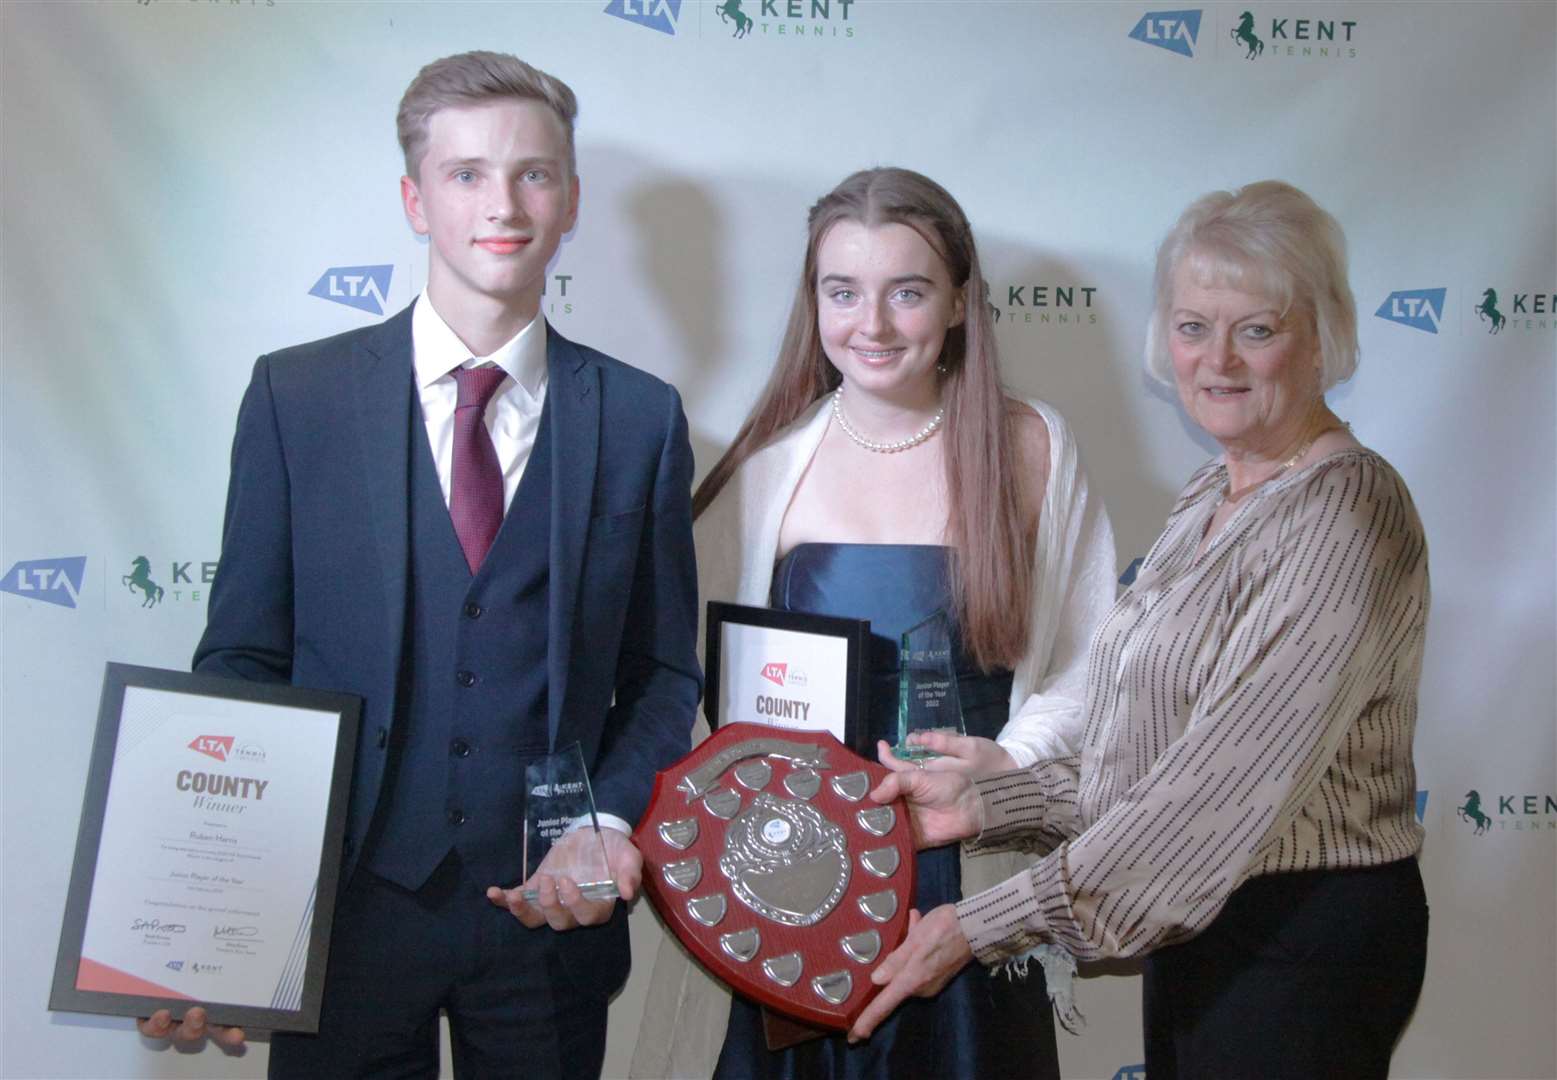 Junior players of the year Canterbury's Ruben Harris and Eloise Newbury, from Bromley, receive their awards from Kent LTA president Mary Evans